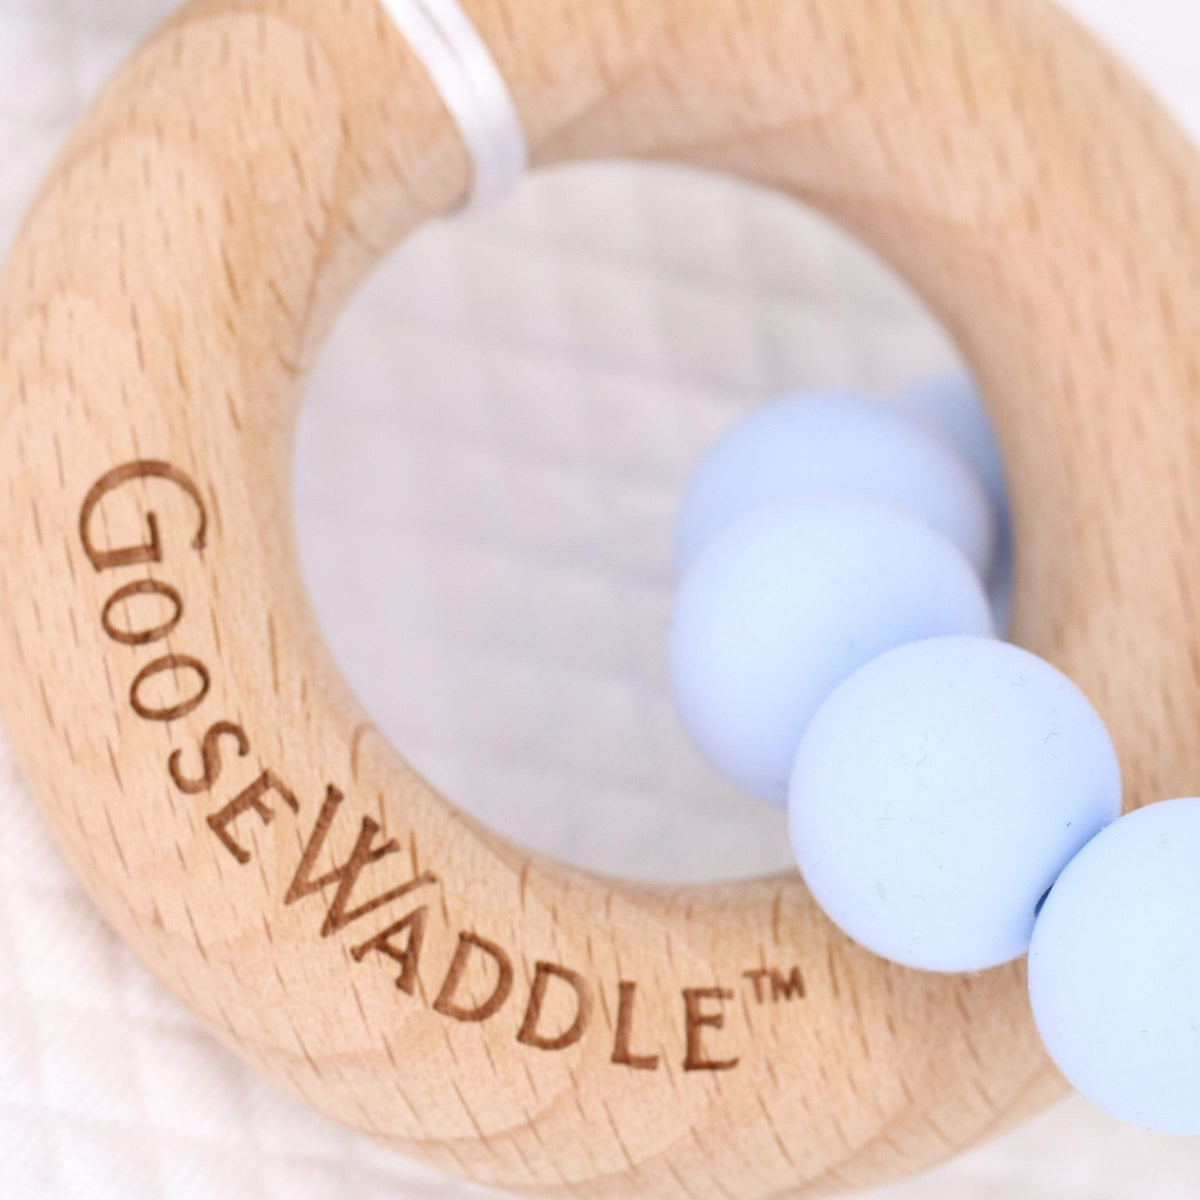 Goosewaddle Teether Wooden and Silicone Teether - Blue Imperial Distribution